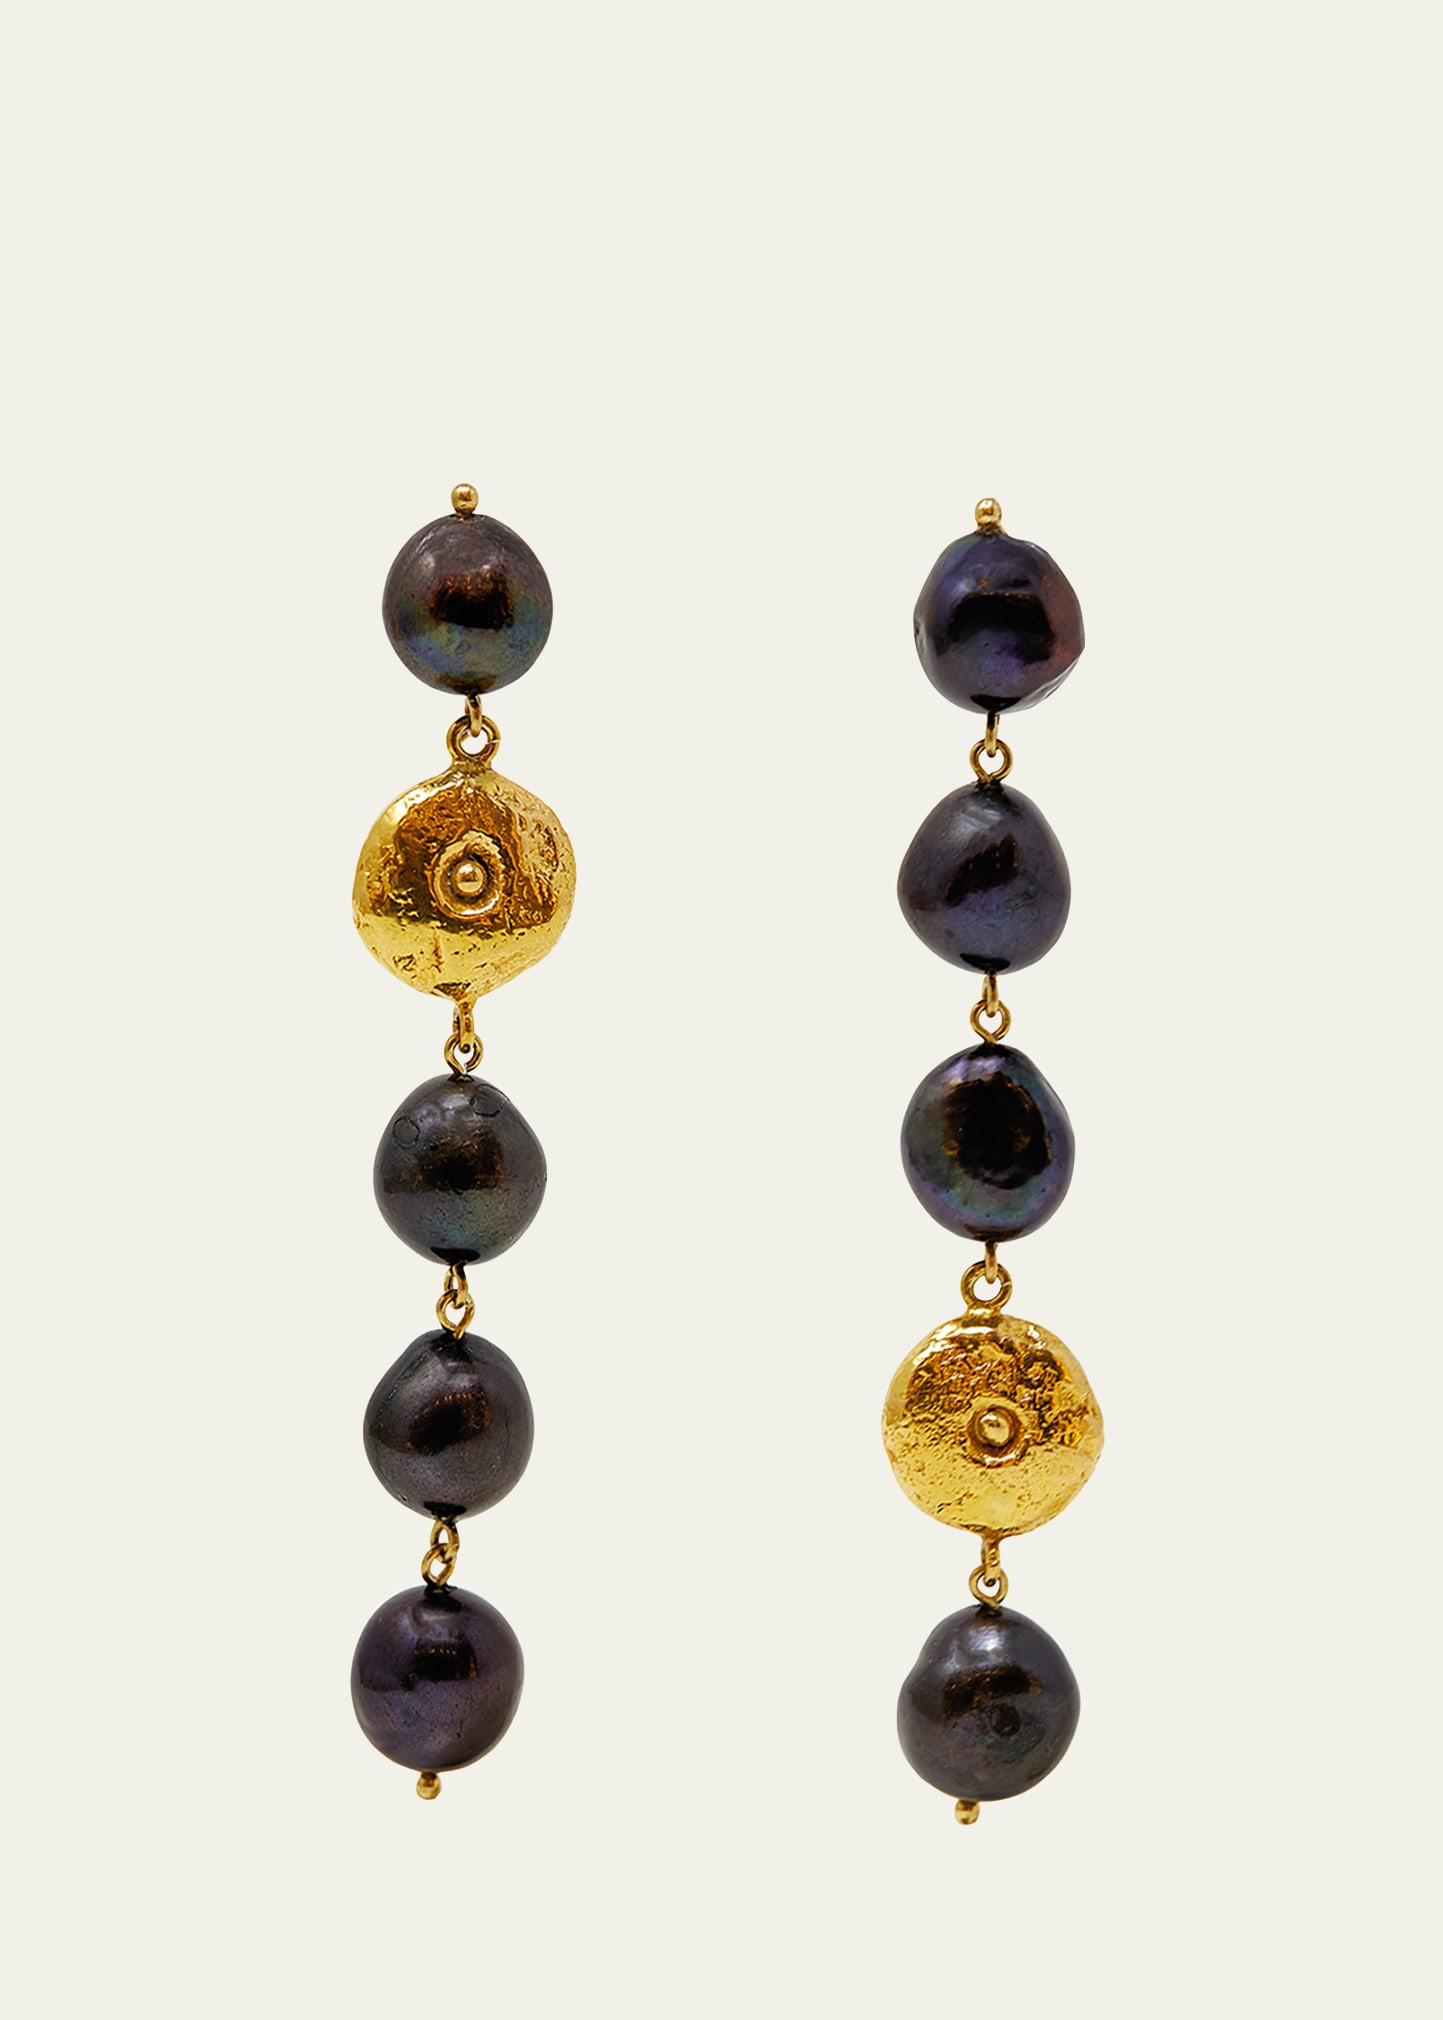 Grazia And Marica Vozza 14k Yellow Gold Drop Earrings With Black Freshwater Pearls In Yg